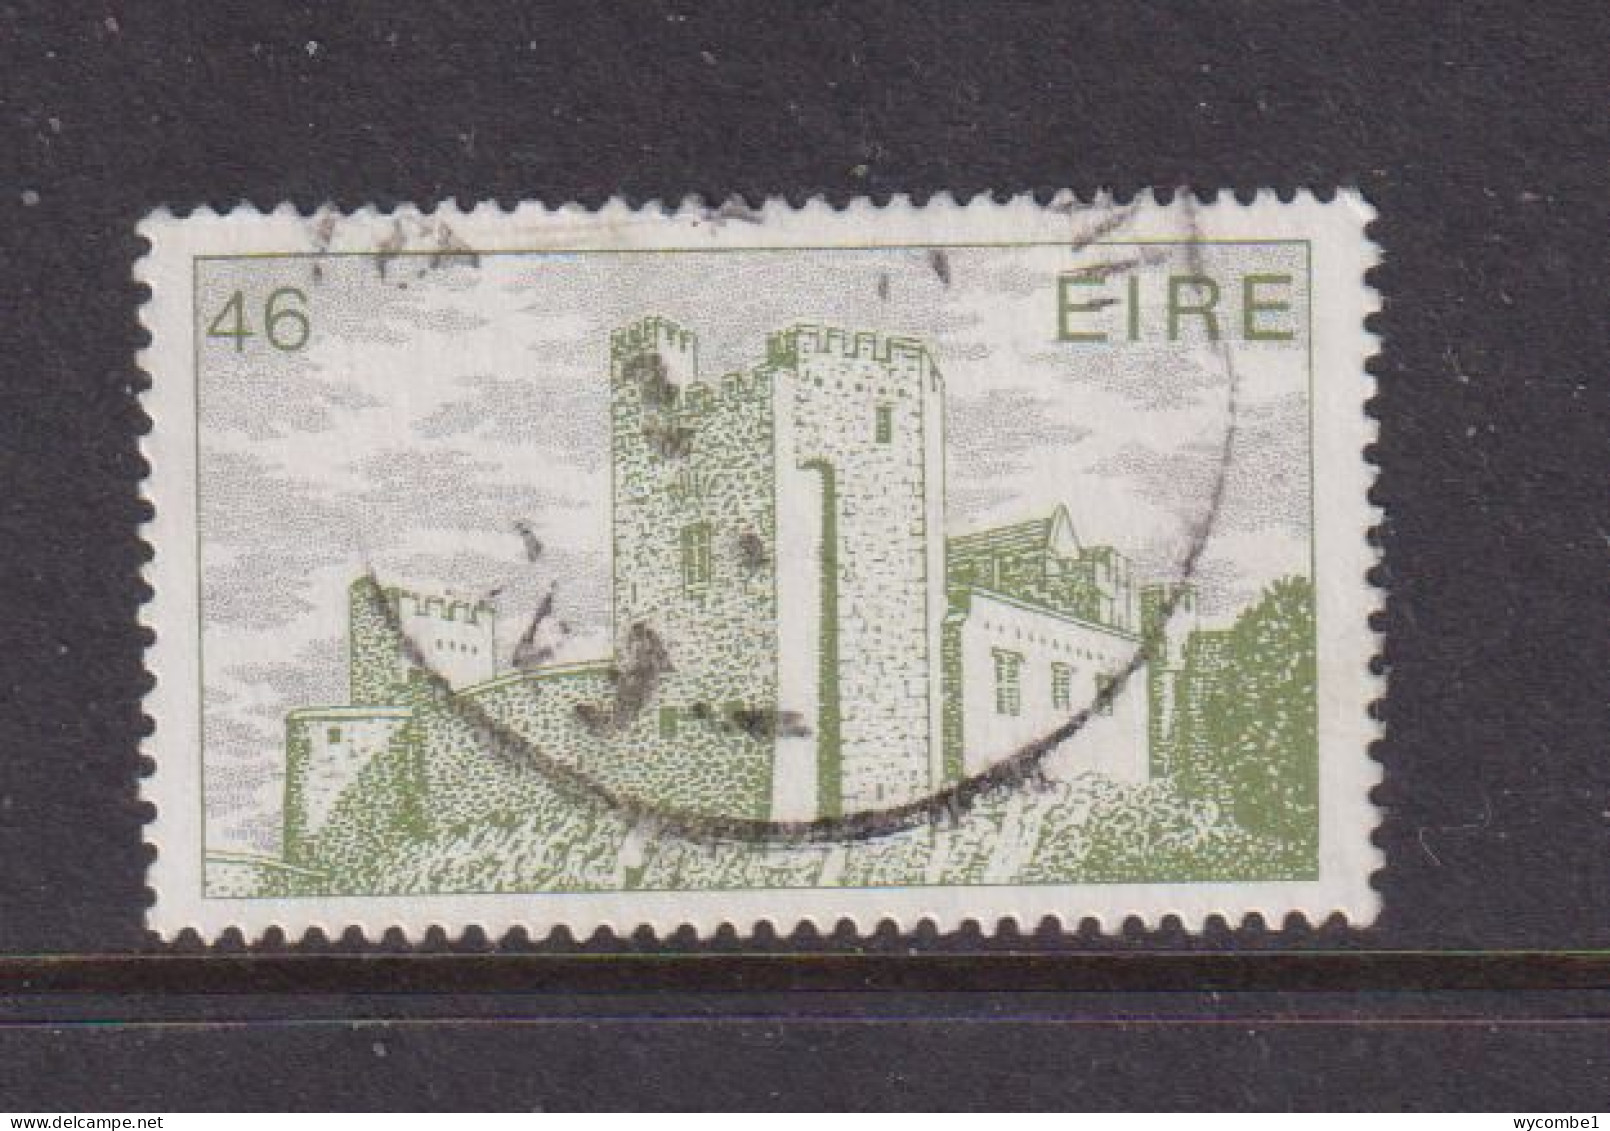 IRELAND - 1963  Architecture Definitive  46p Used As Scan - Usati